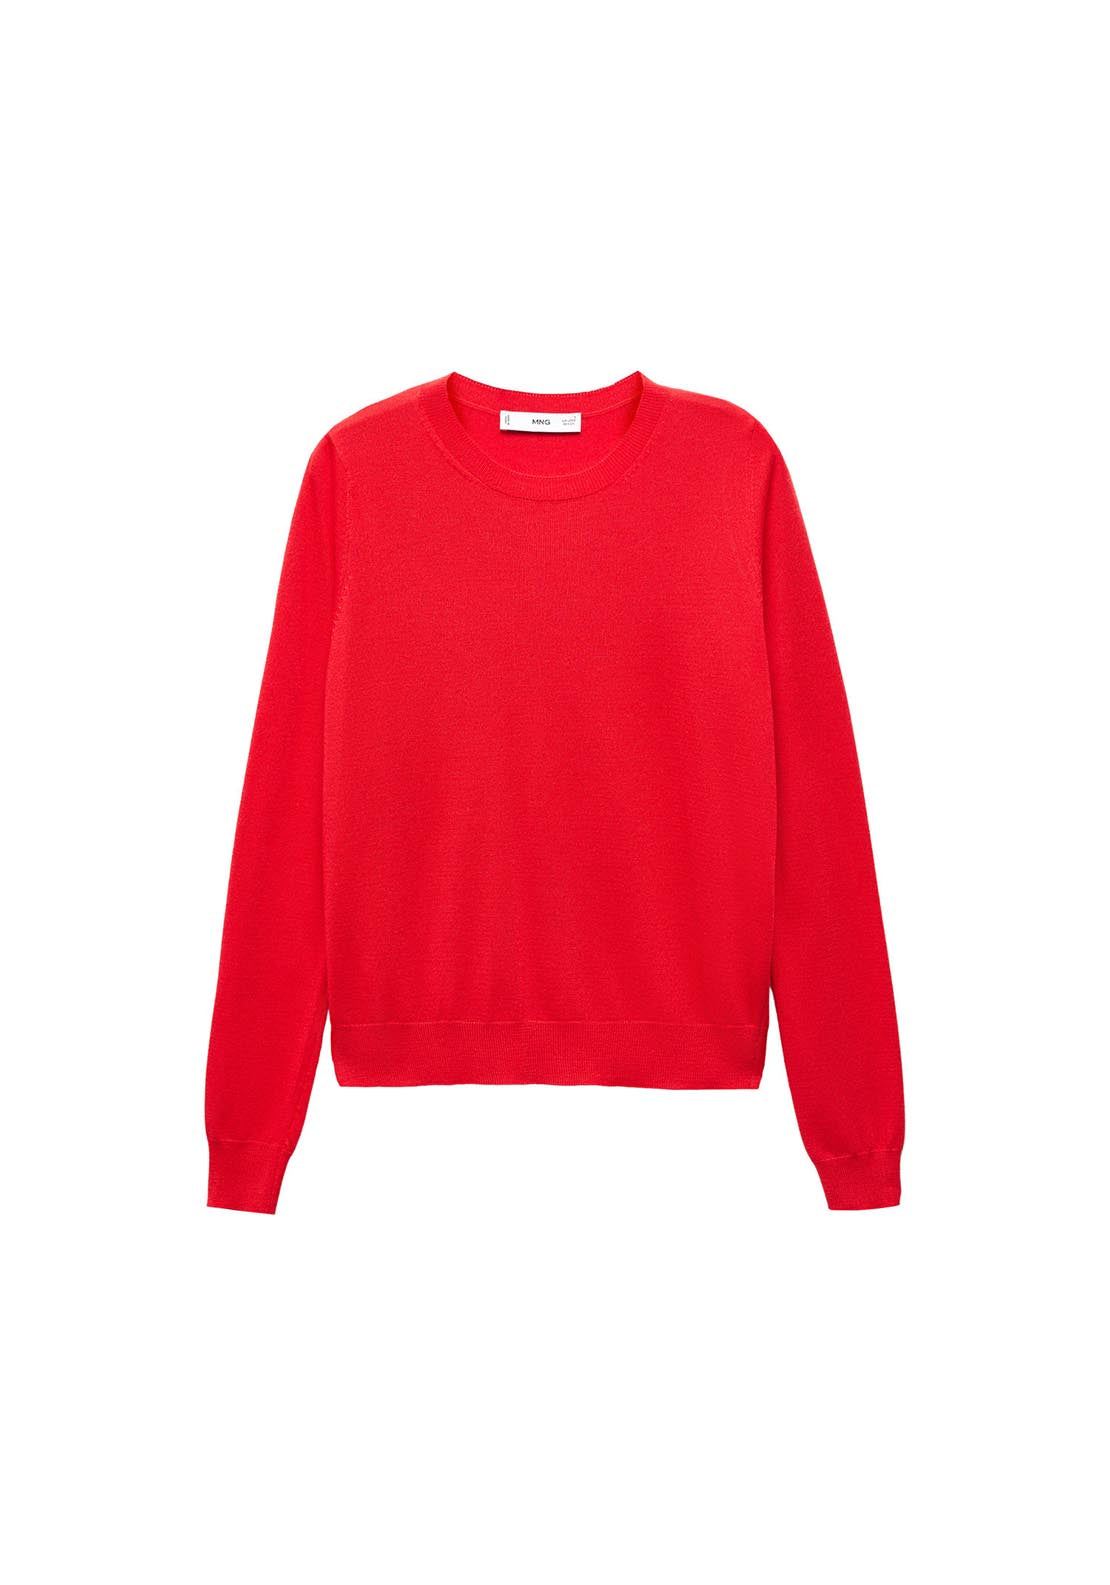 Mango Roundneck knitted sweater 3 Shaws Department Stores